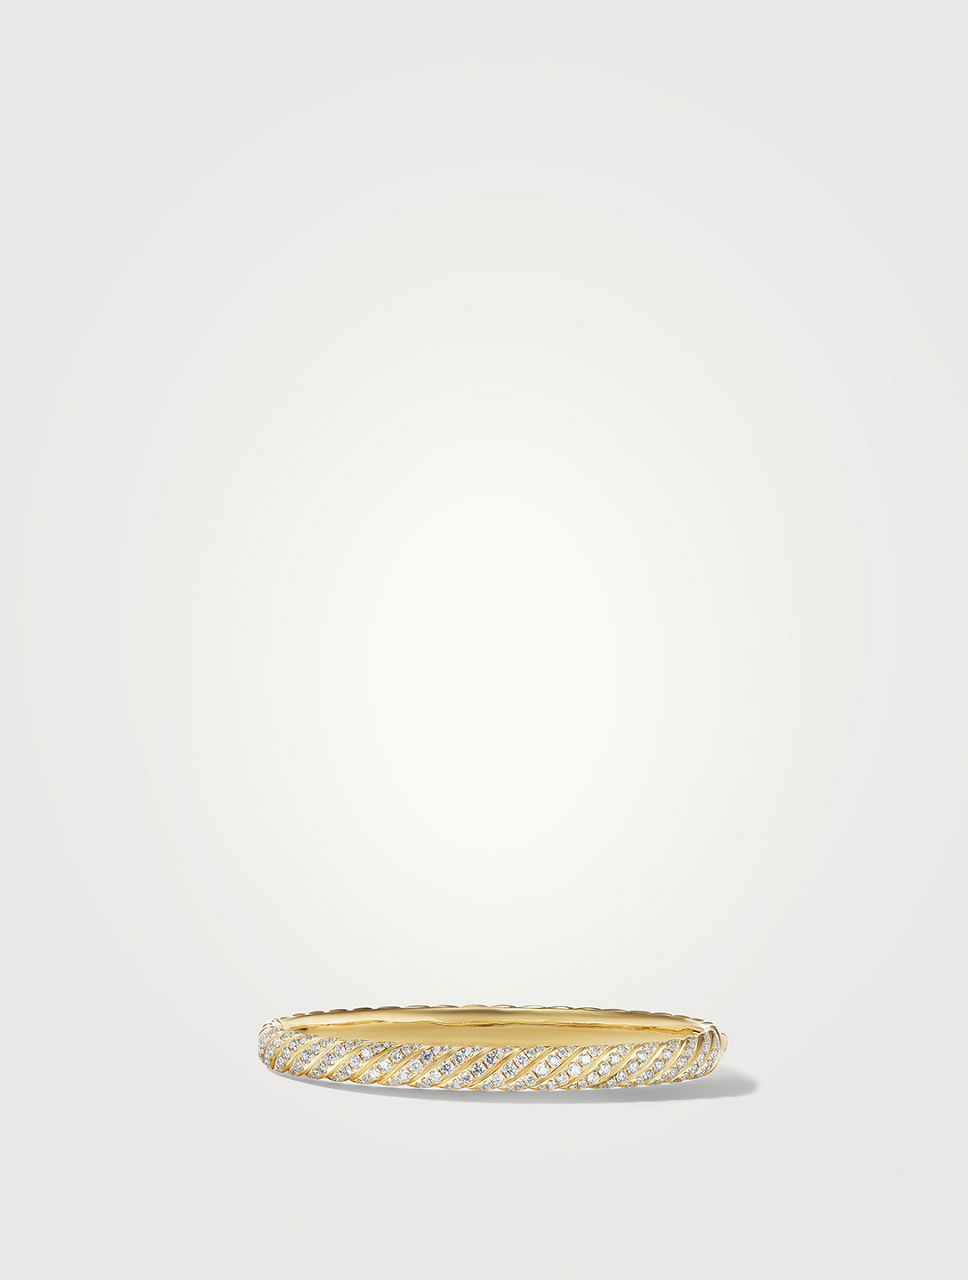 Sculpted Cable Bangle Bracelet 18k Gold With Diamonds